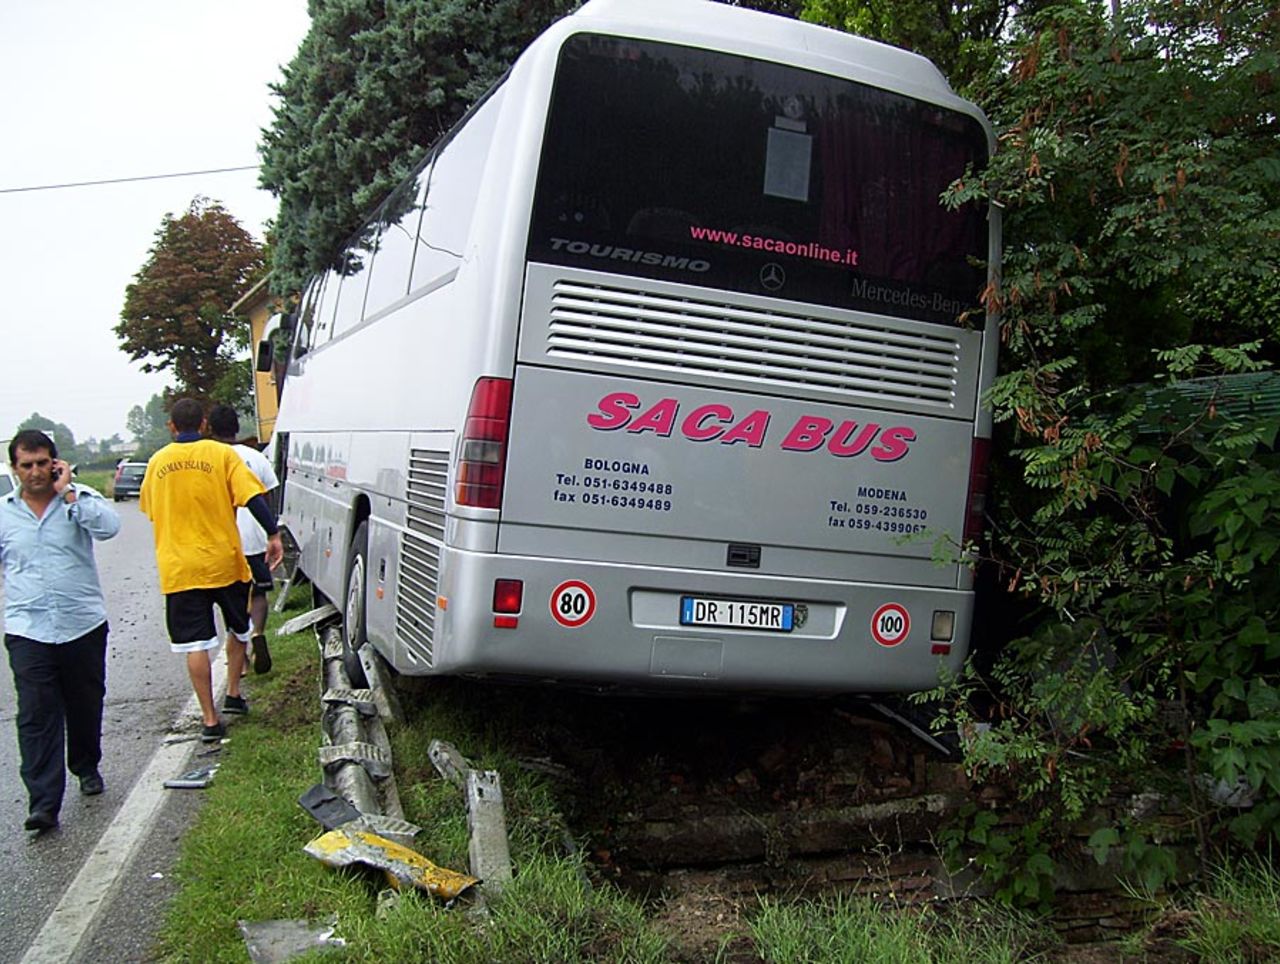 The bus carrying the Italy and Cayman Islands teams after the accident, ICC World Cricket League Division 4, Bologna, August 14, 2010